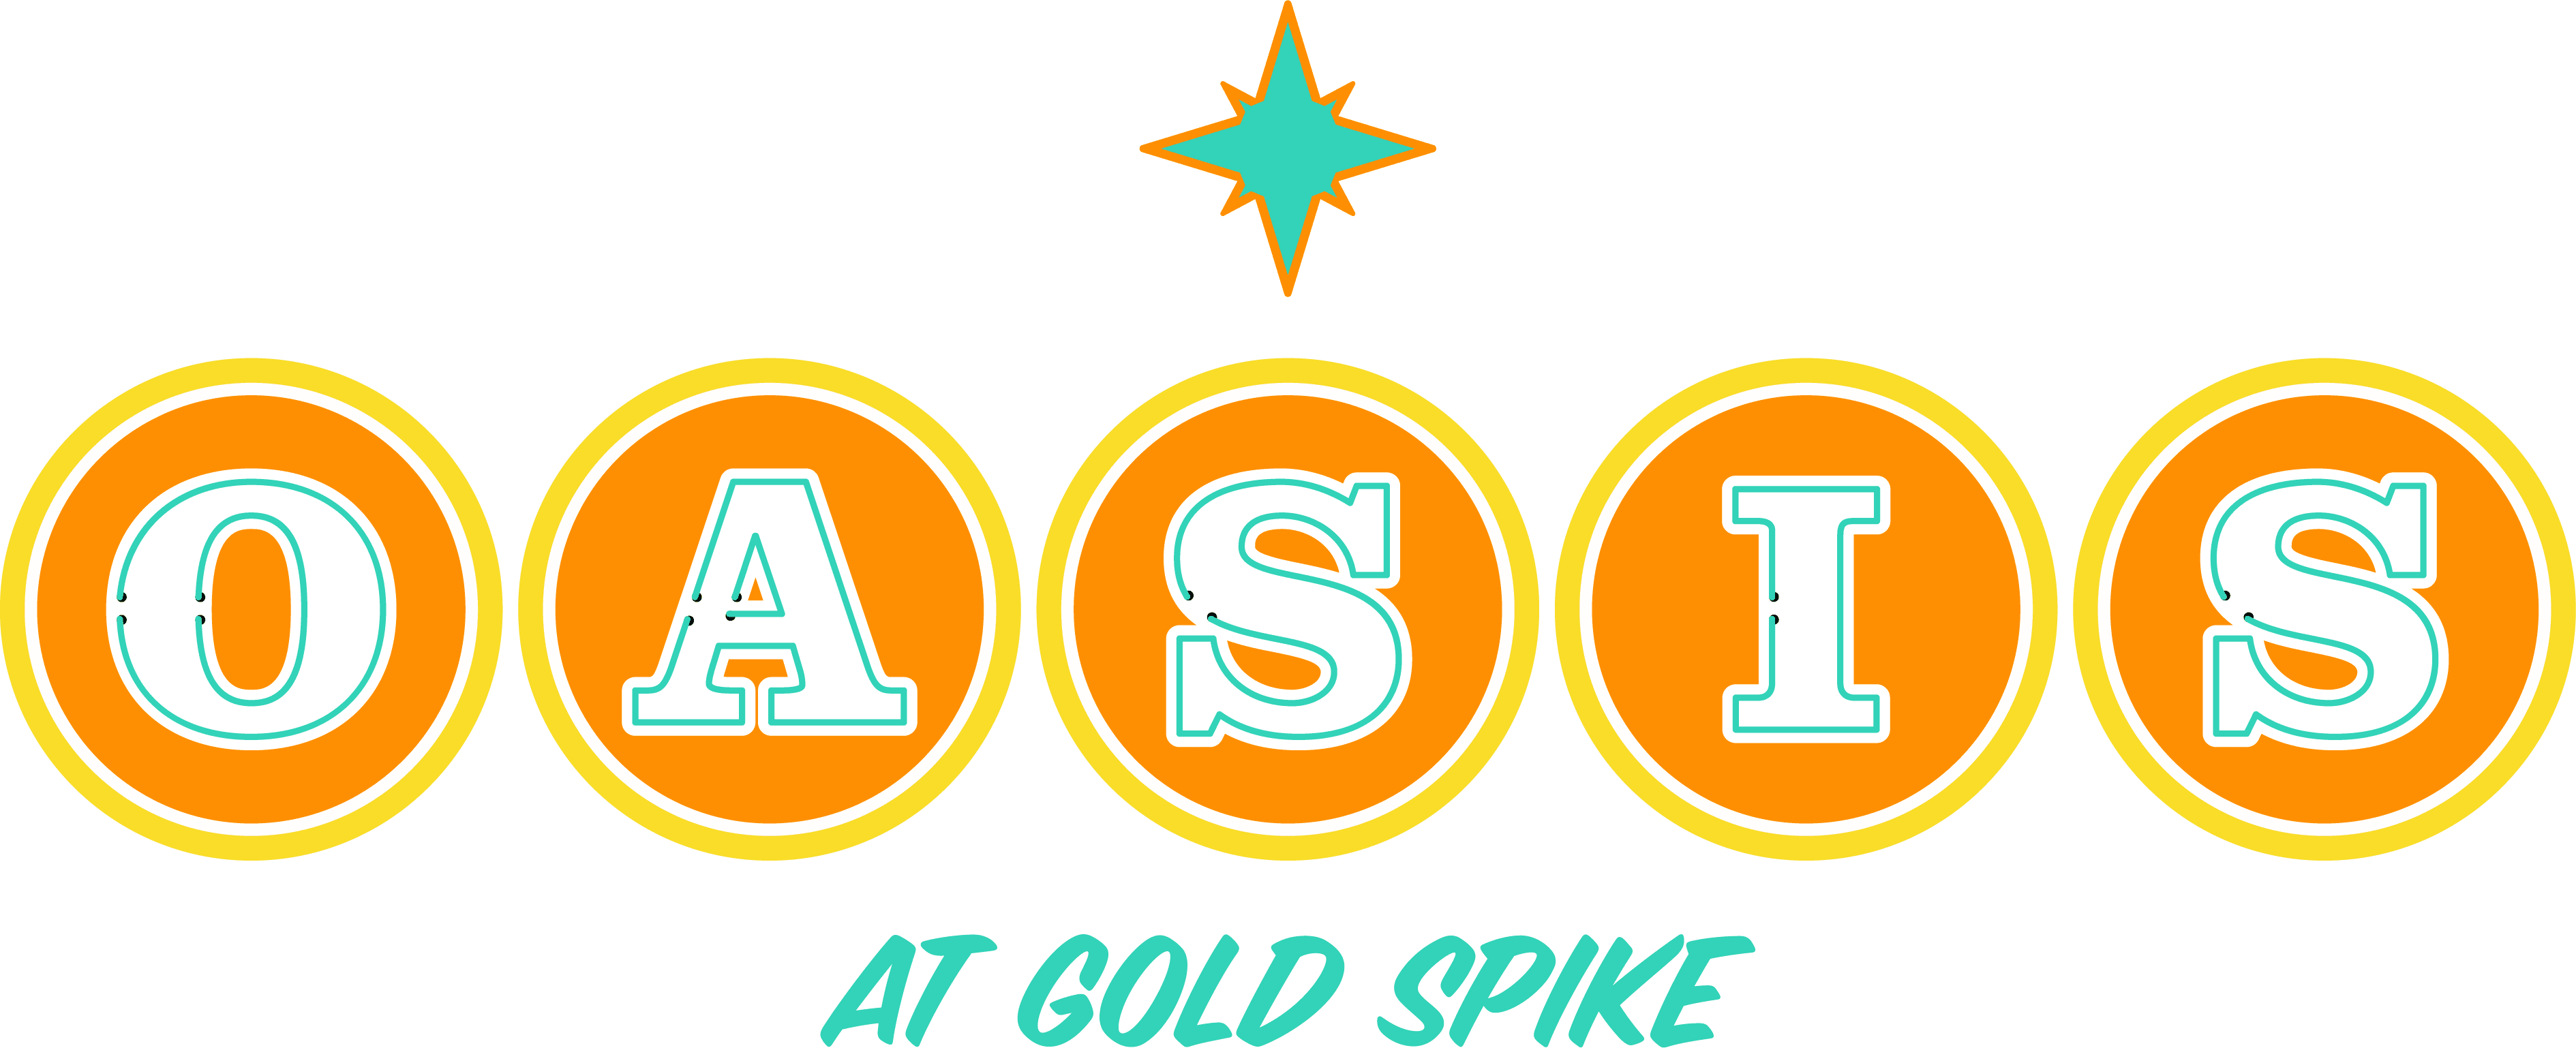 hotel oasis at gold spike